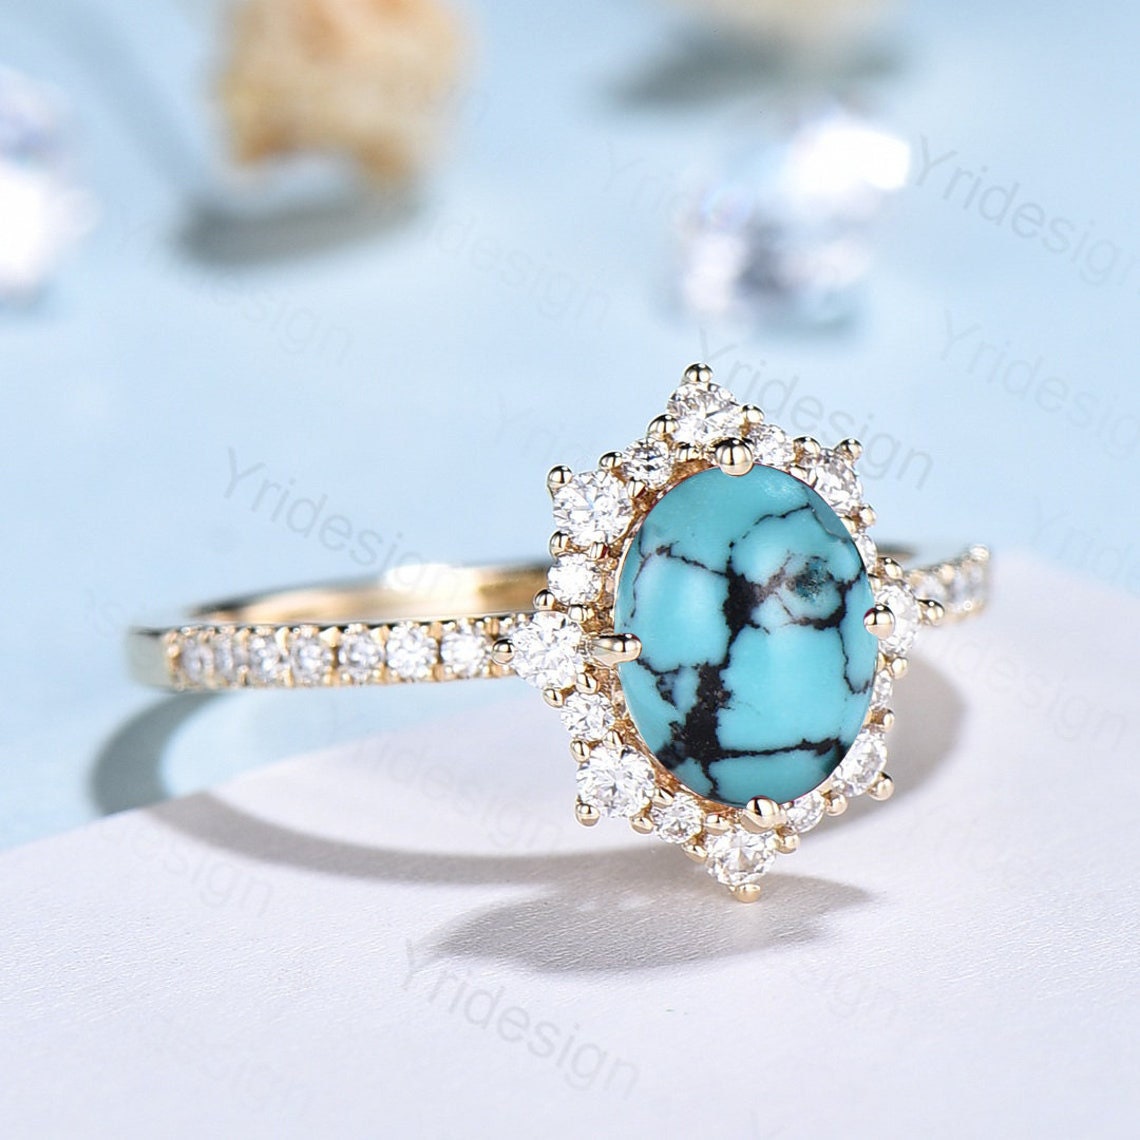 Vintage turquoise engagement ring halo moissanite oval turquoise rings for women December birthstone ring bridal wedding promise ring - PENFINE